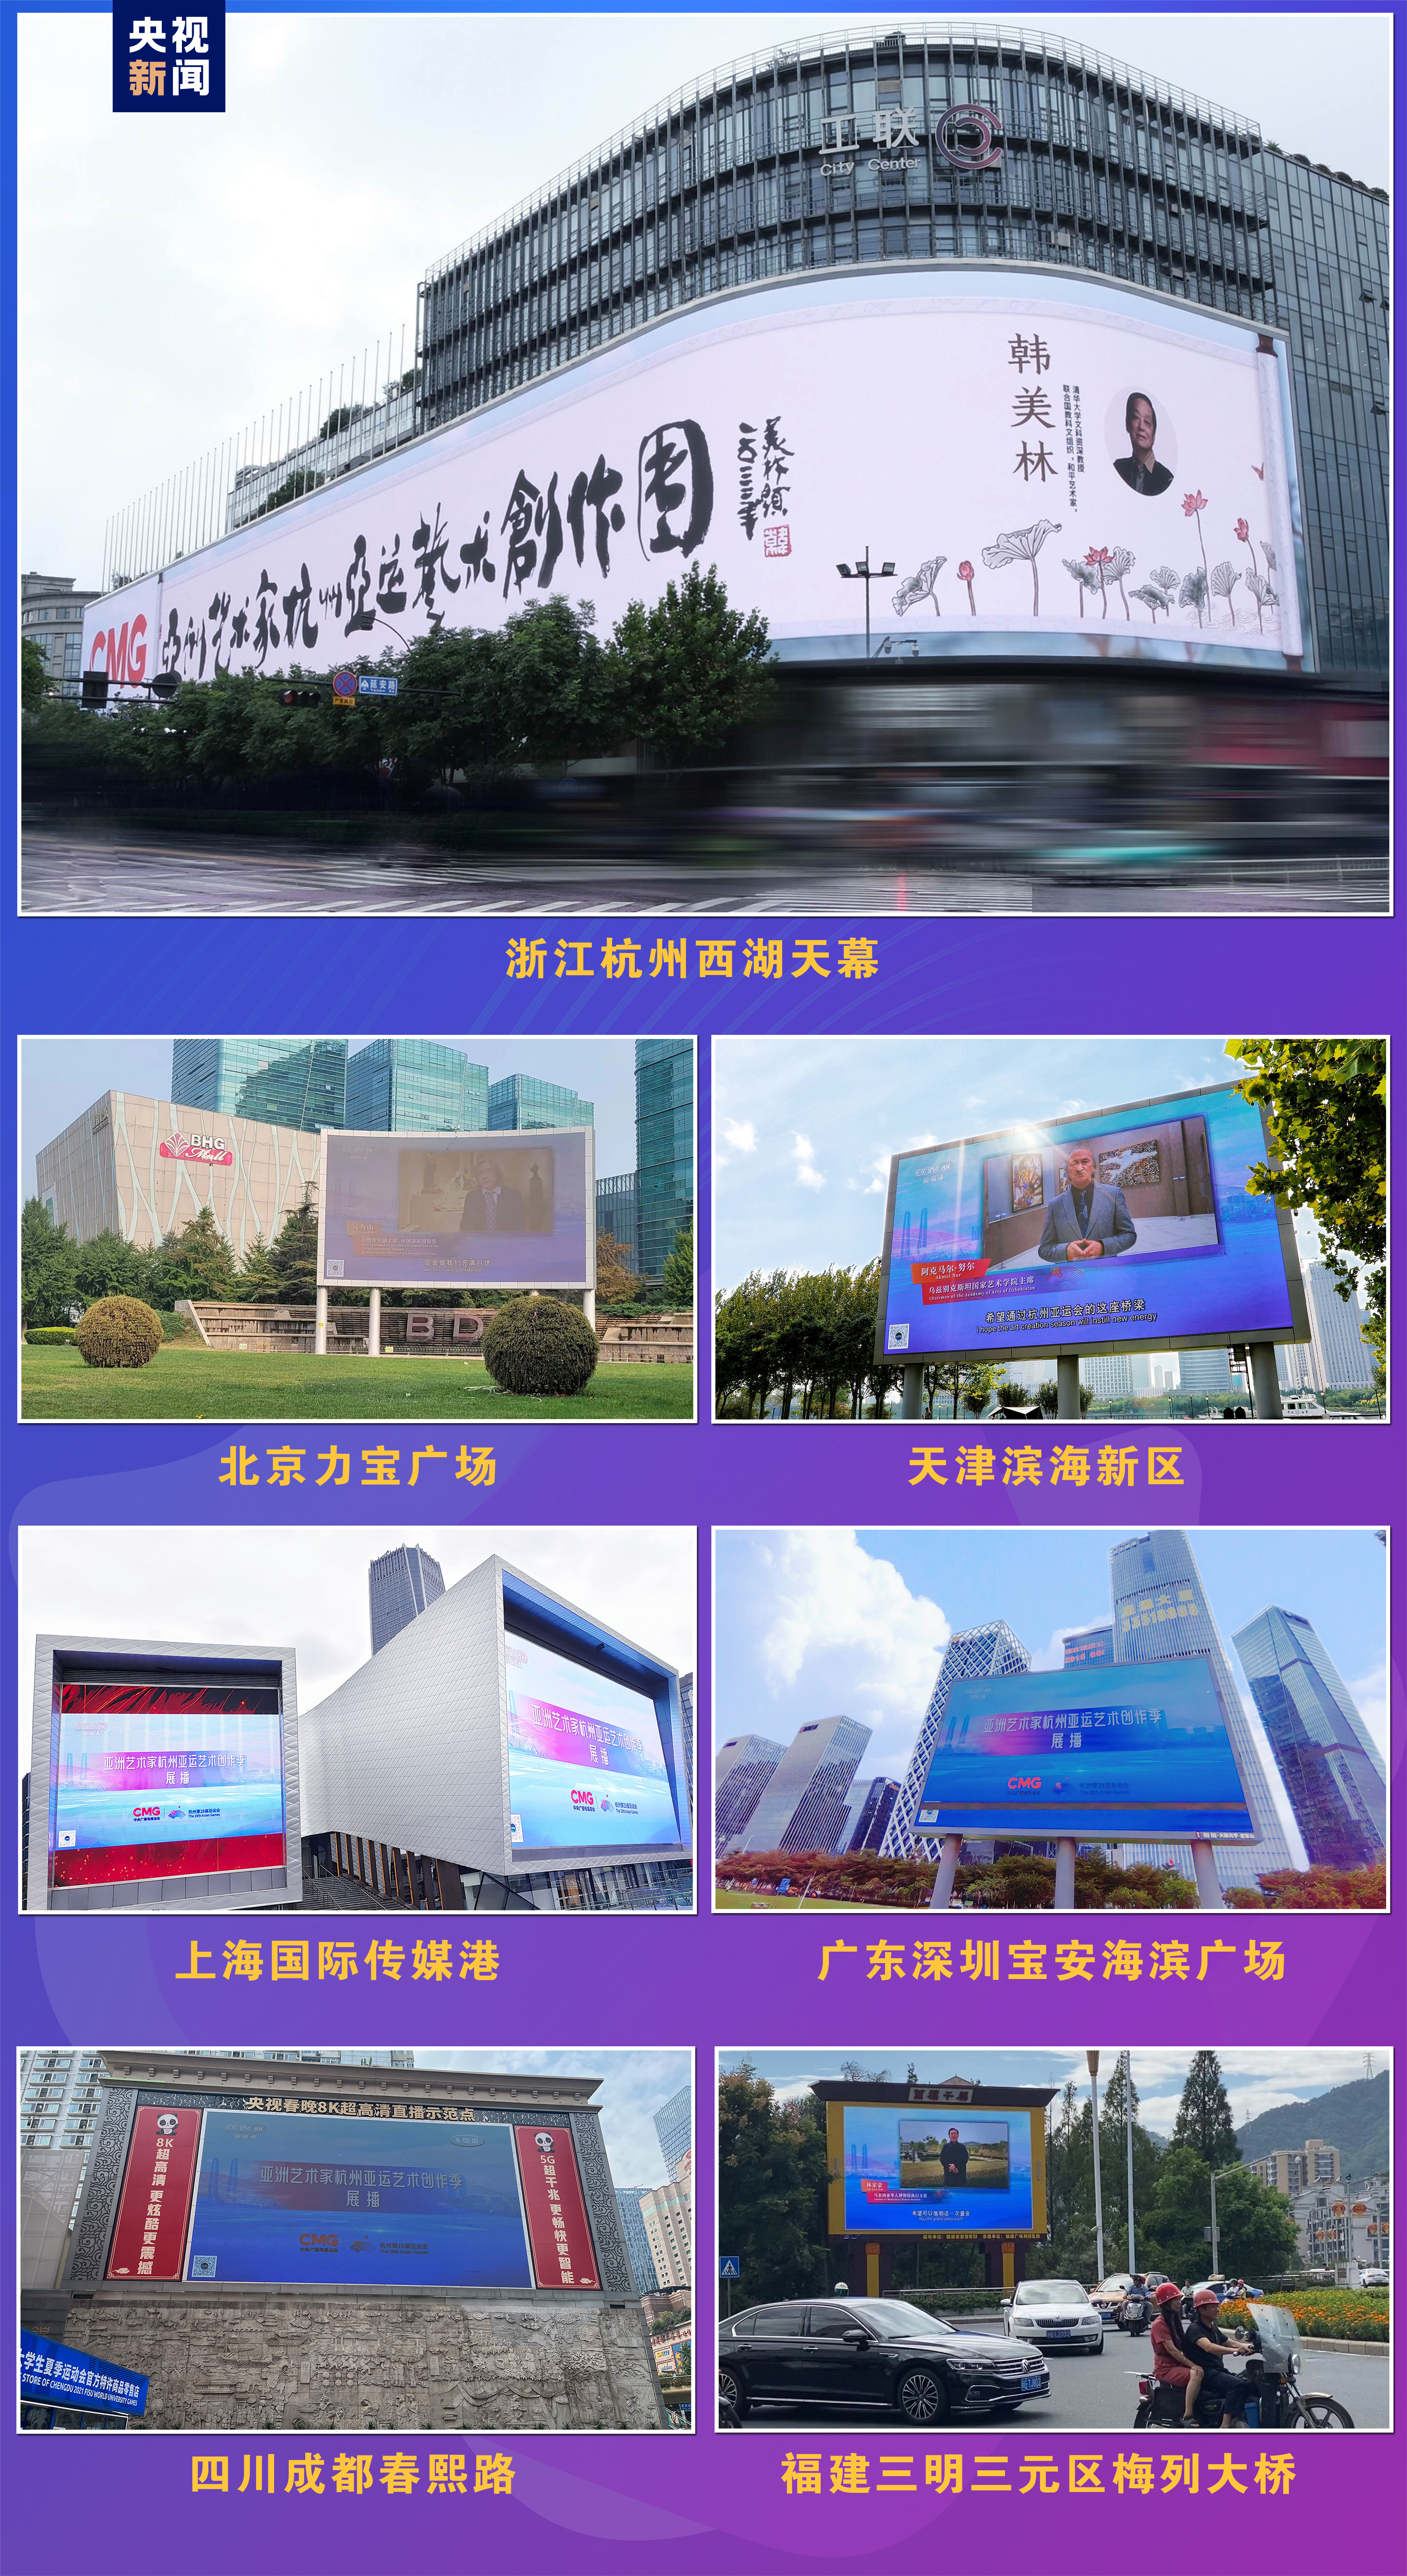 Artworks created by Asian artists are displayed on mega screens in cities across China. /CMG